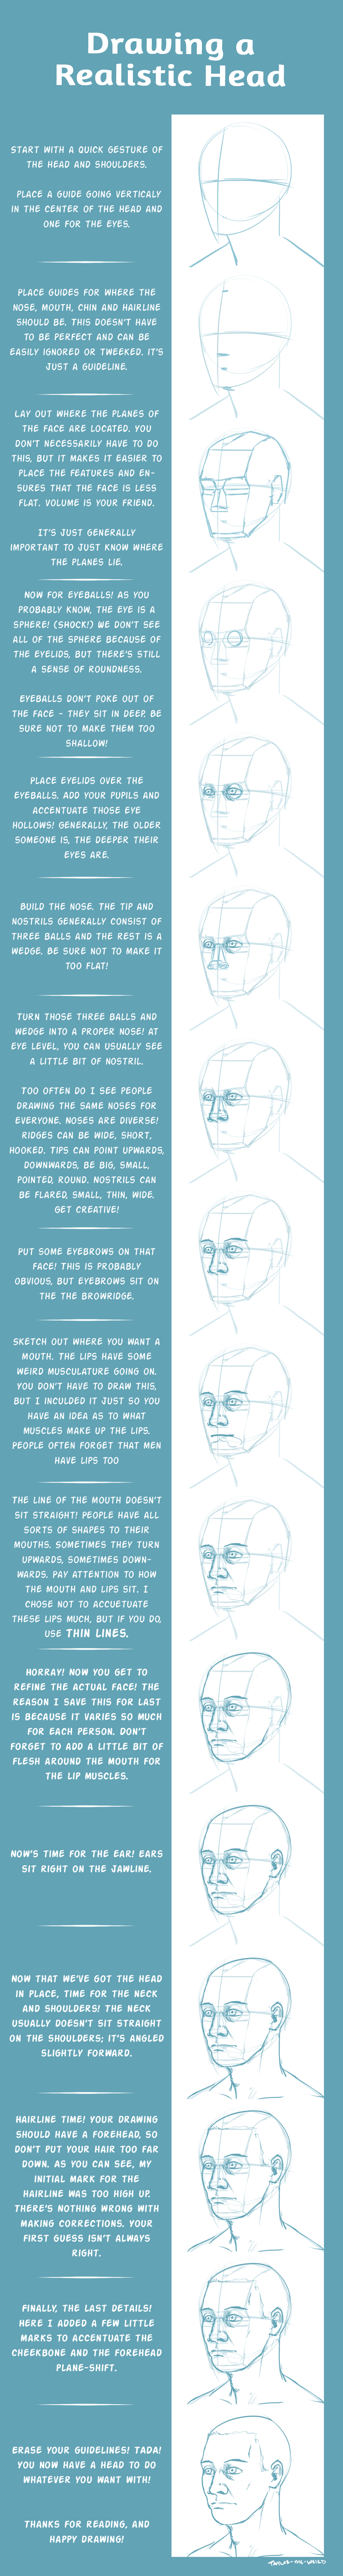 Drawing Realistic Heads - A Guide